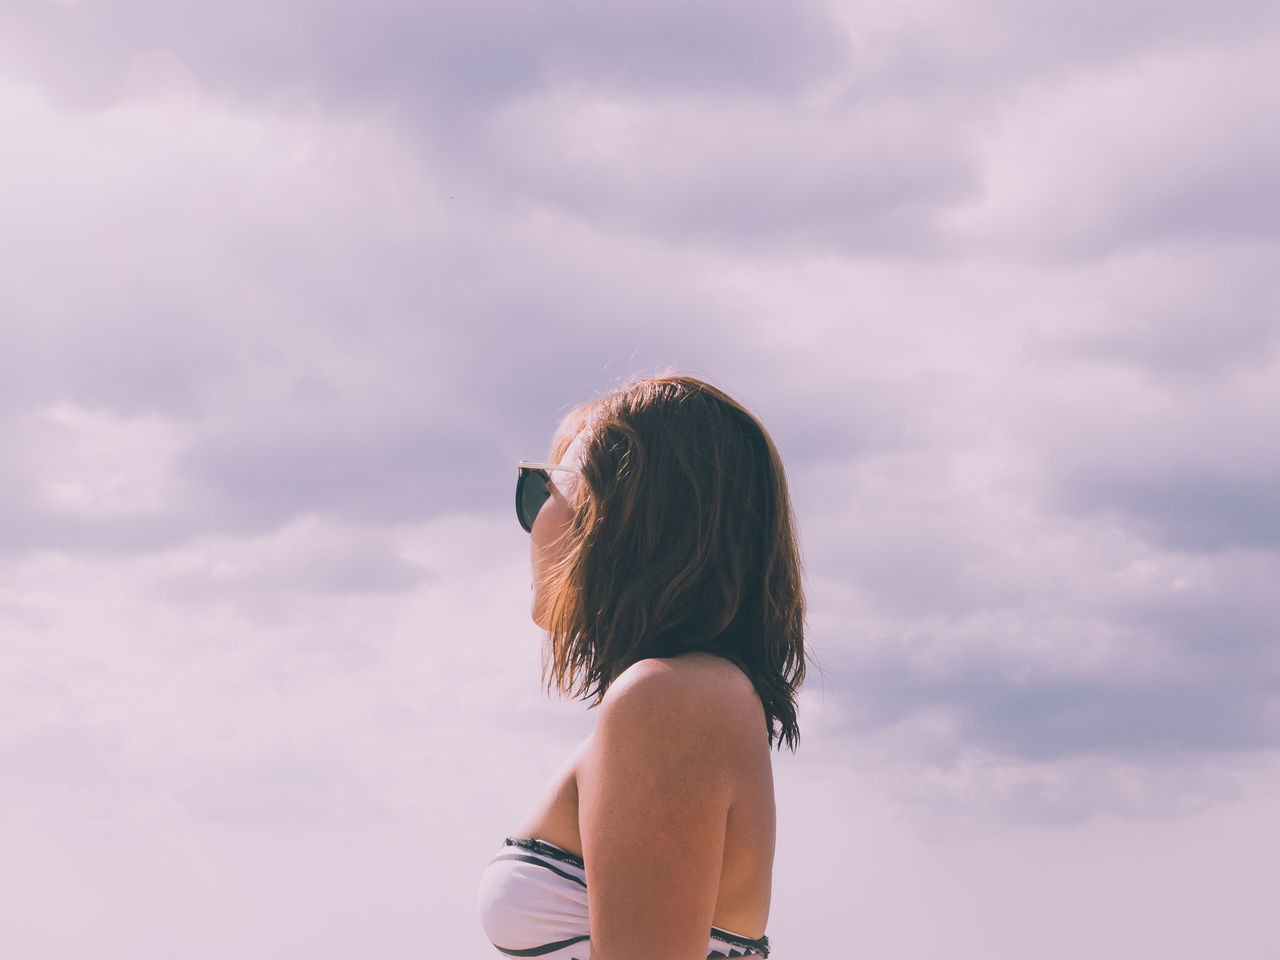 cloud - sky, sky, one person, real people, adult, leisure activity, rear view, women, lifestyles, hairstyle, nature, beauty in nature, standing, hair, young women, portrait, outdoors, day, waist up, purple, looking at view